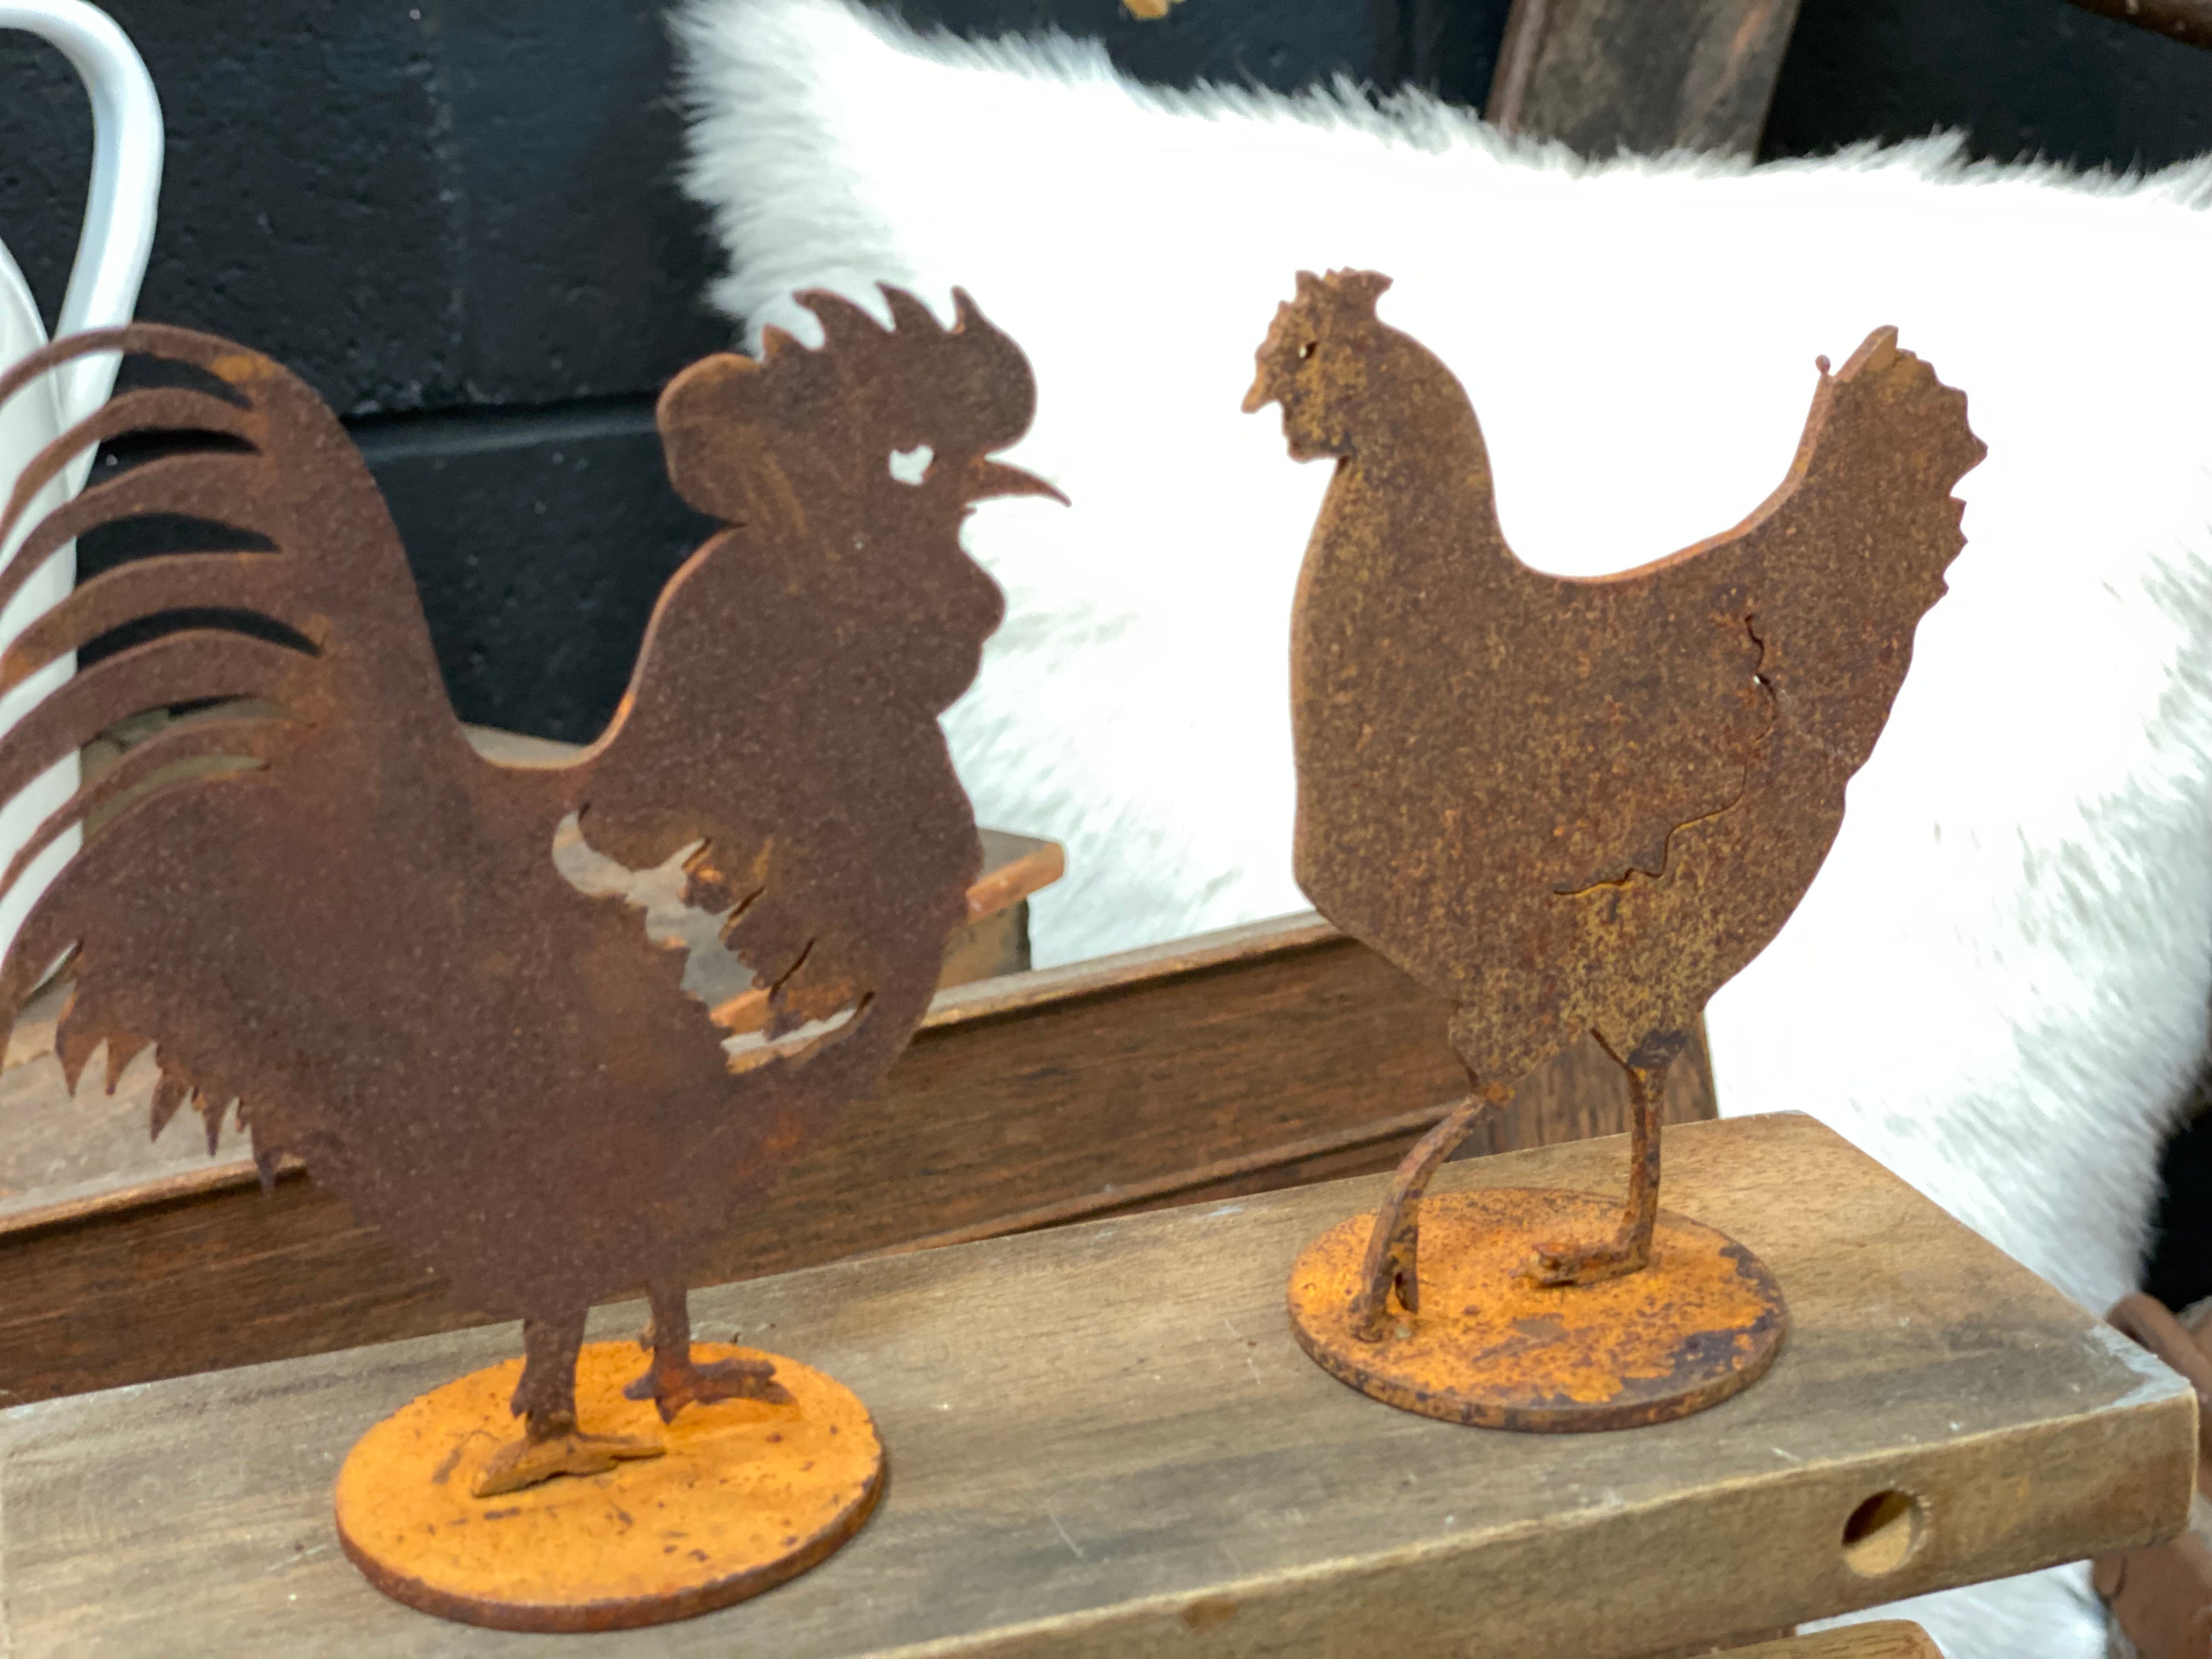 RUSTY Hen & Rooster FREE Postage